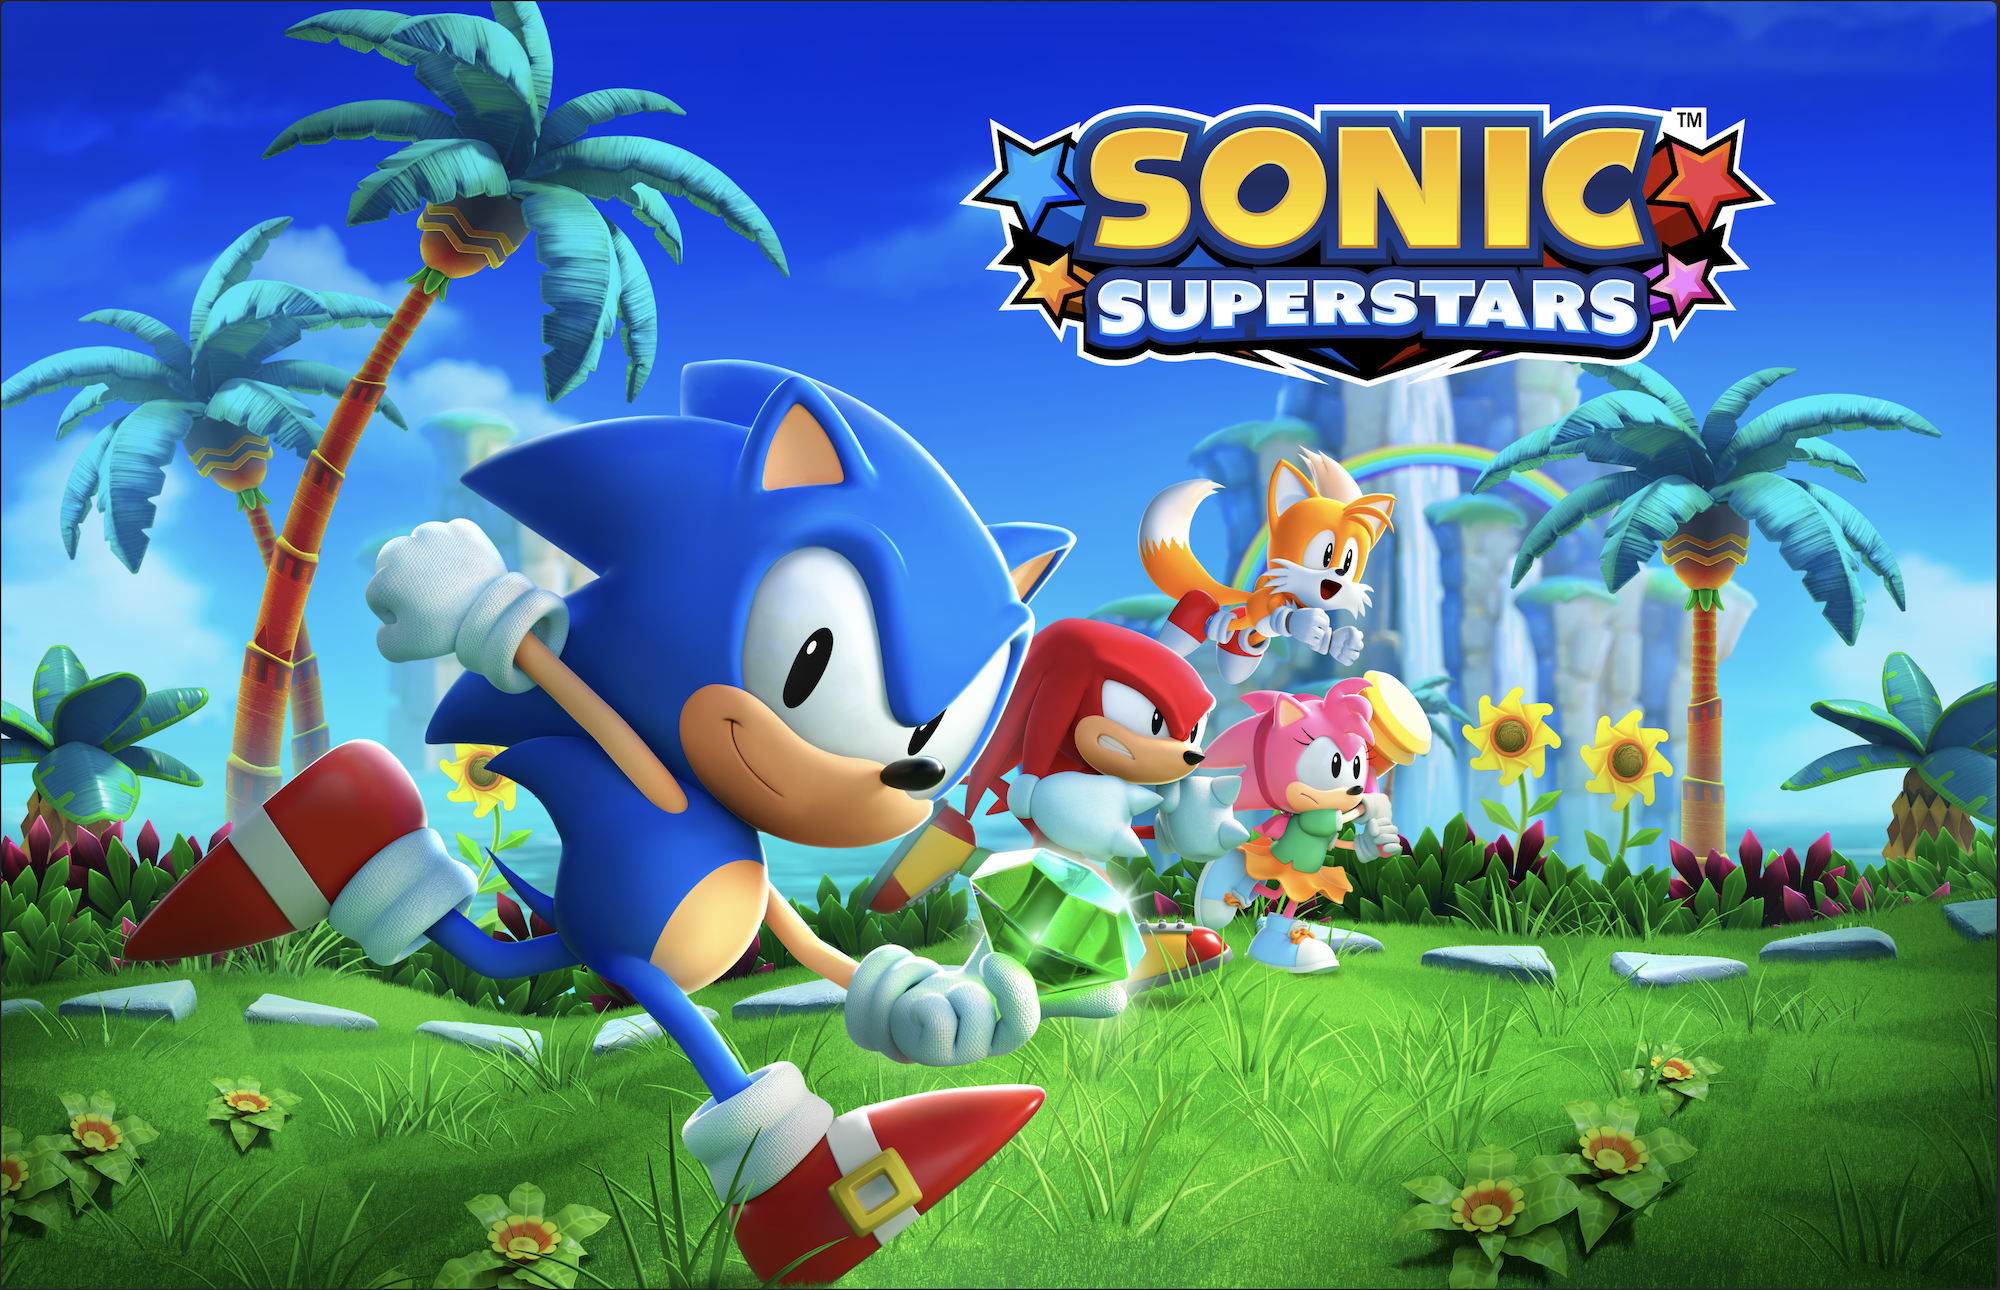 Sonic Generations - Game Overview